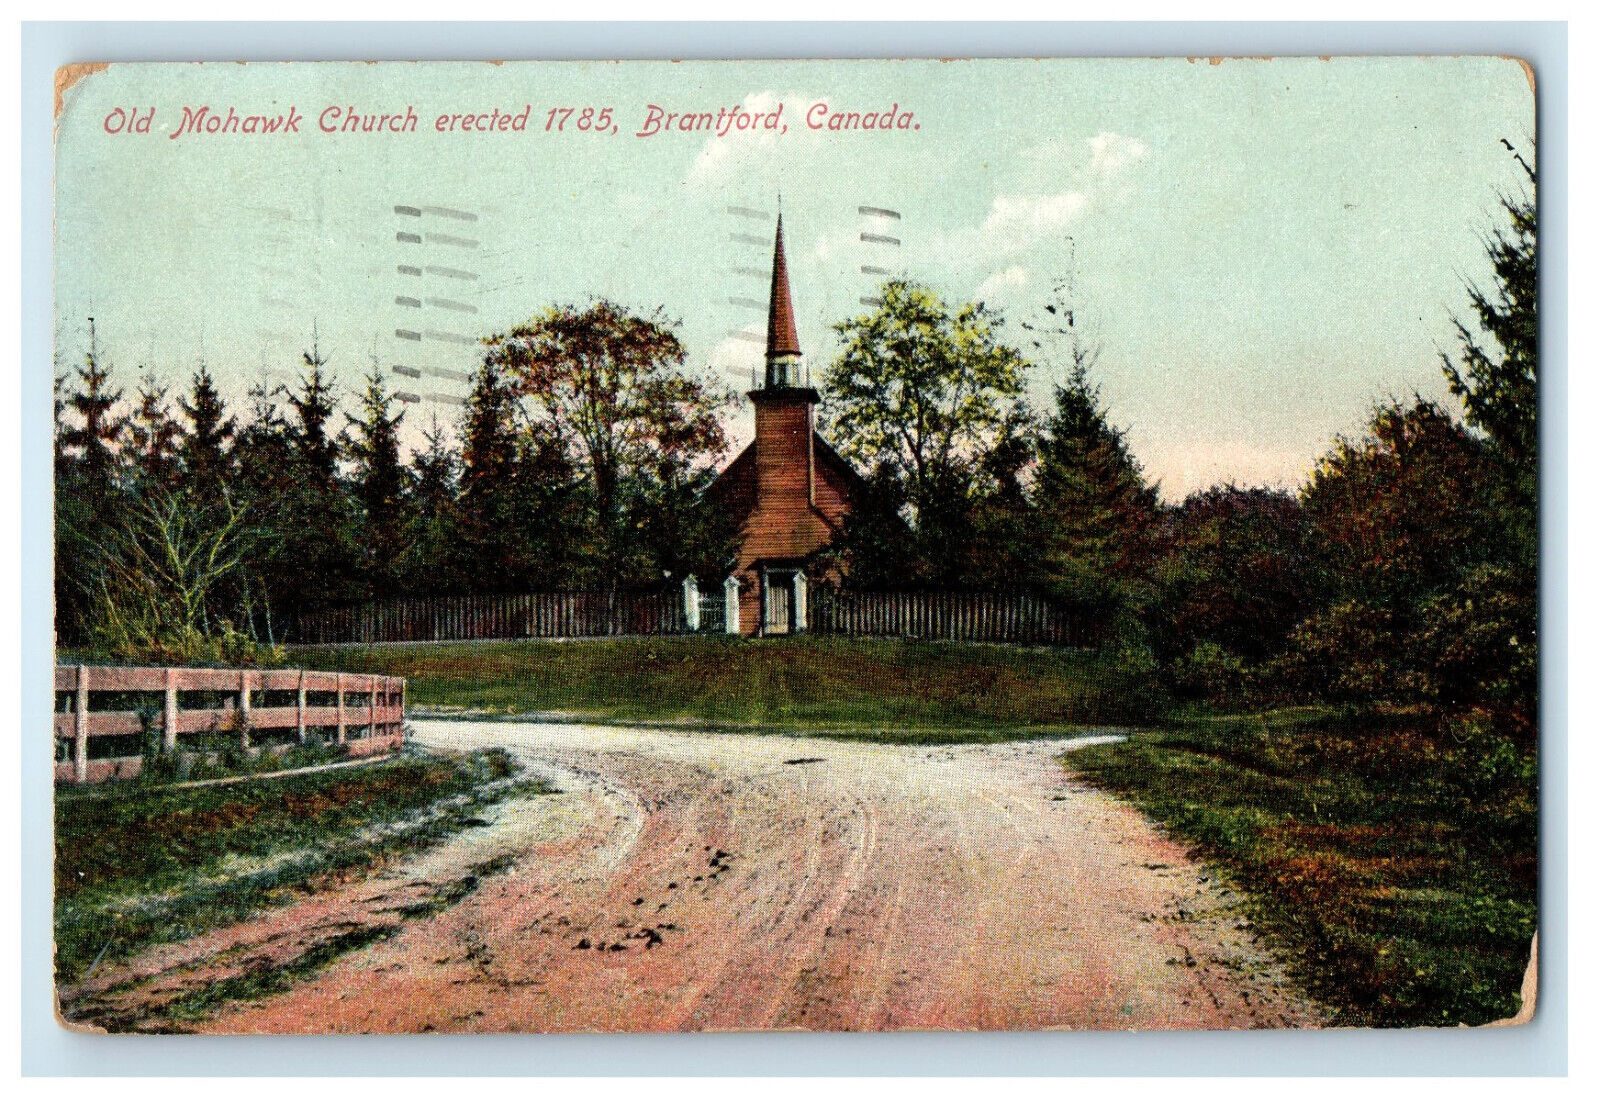 1911 Old Mohawk Church Brantford Canada Posted Antique Postcard